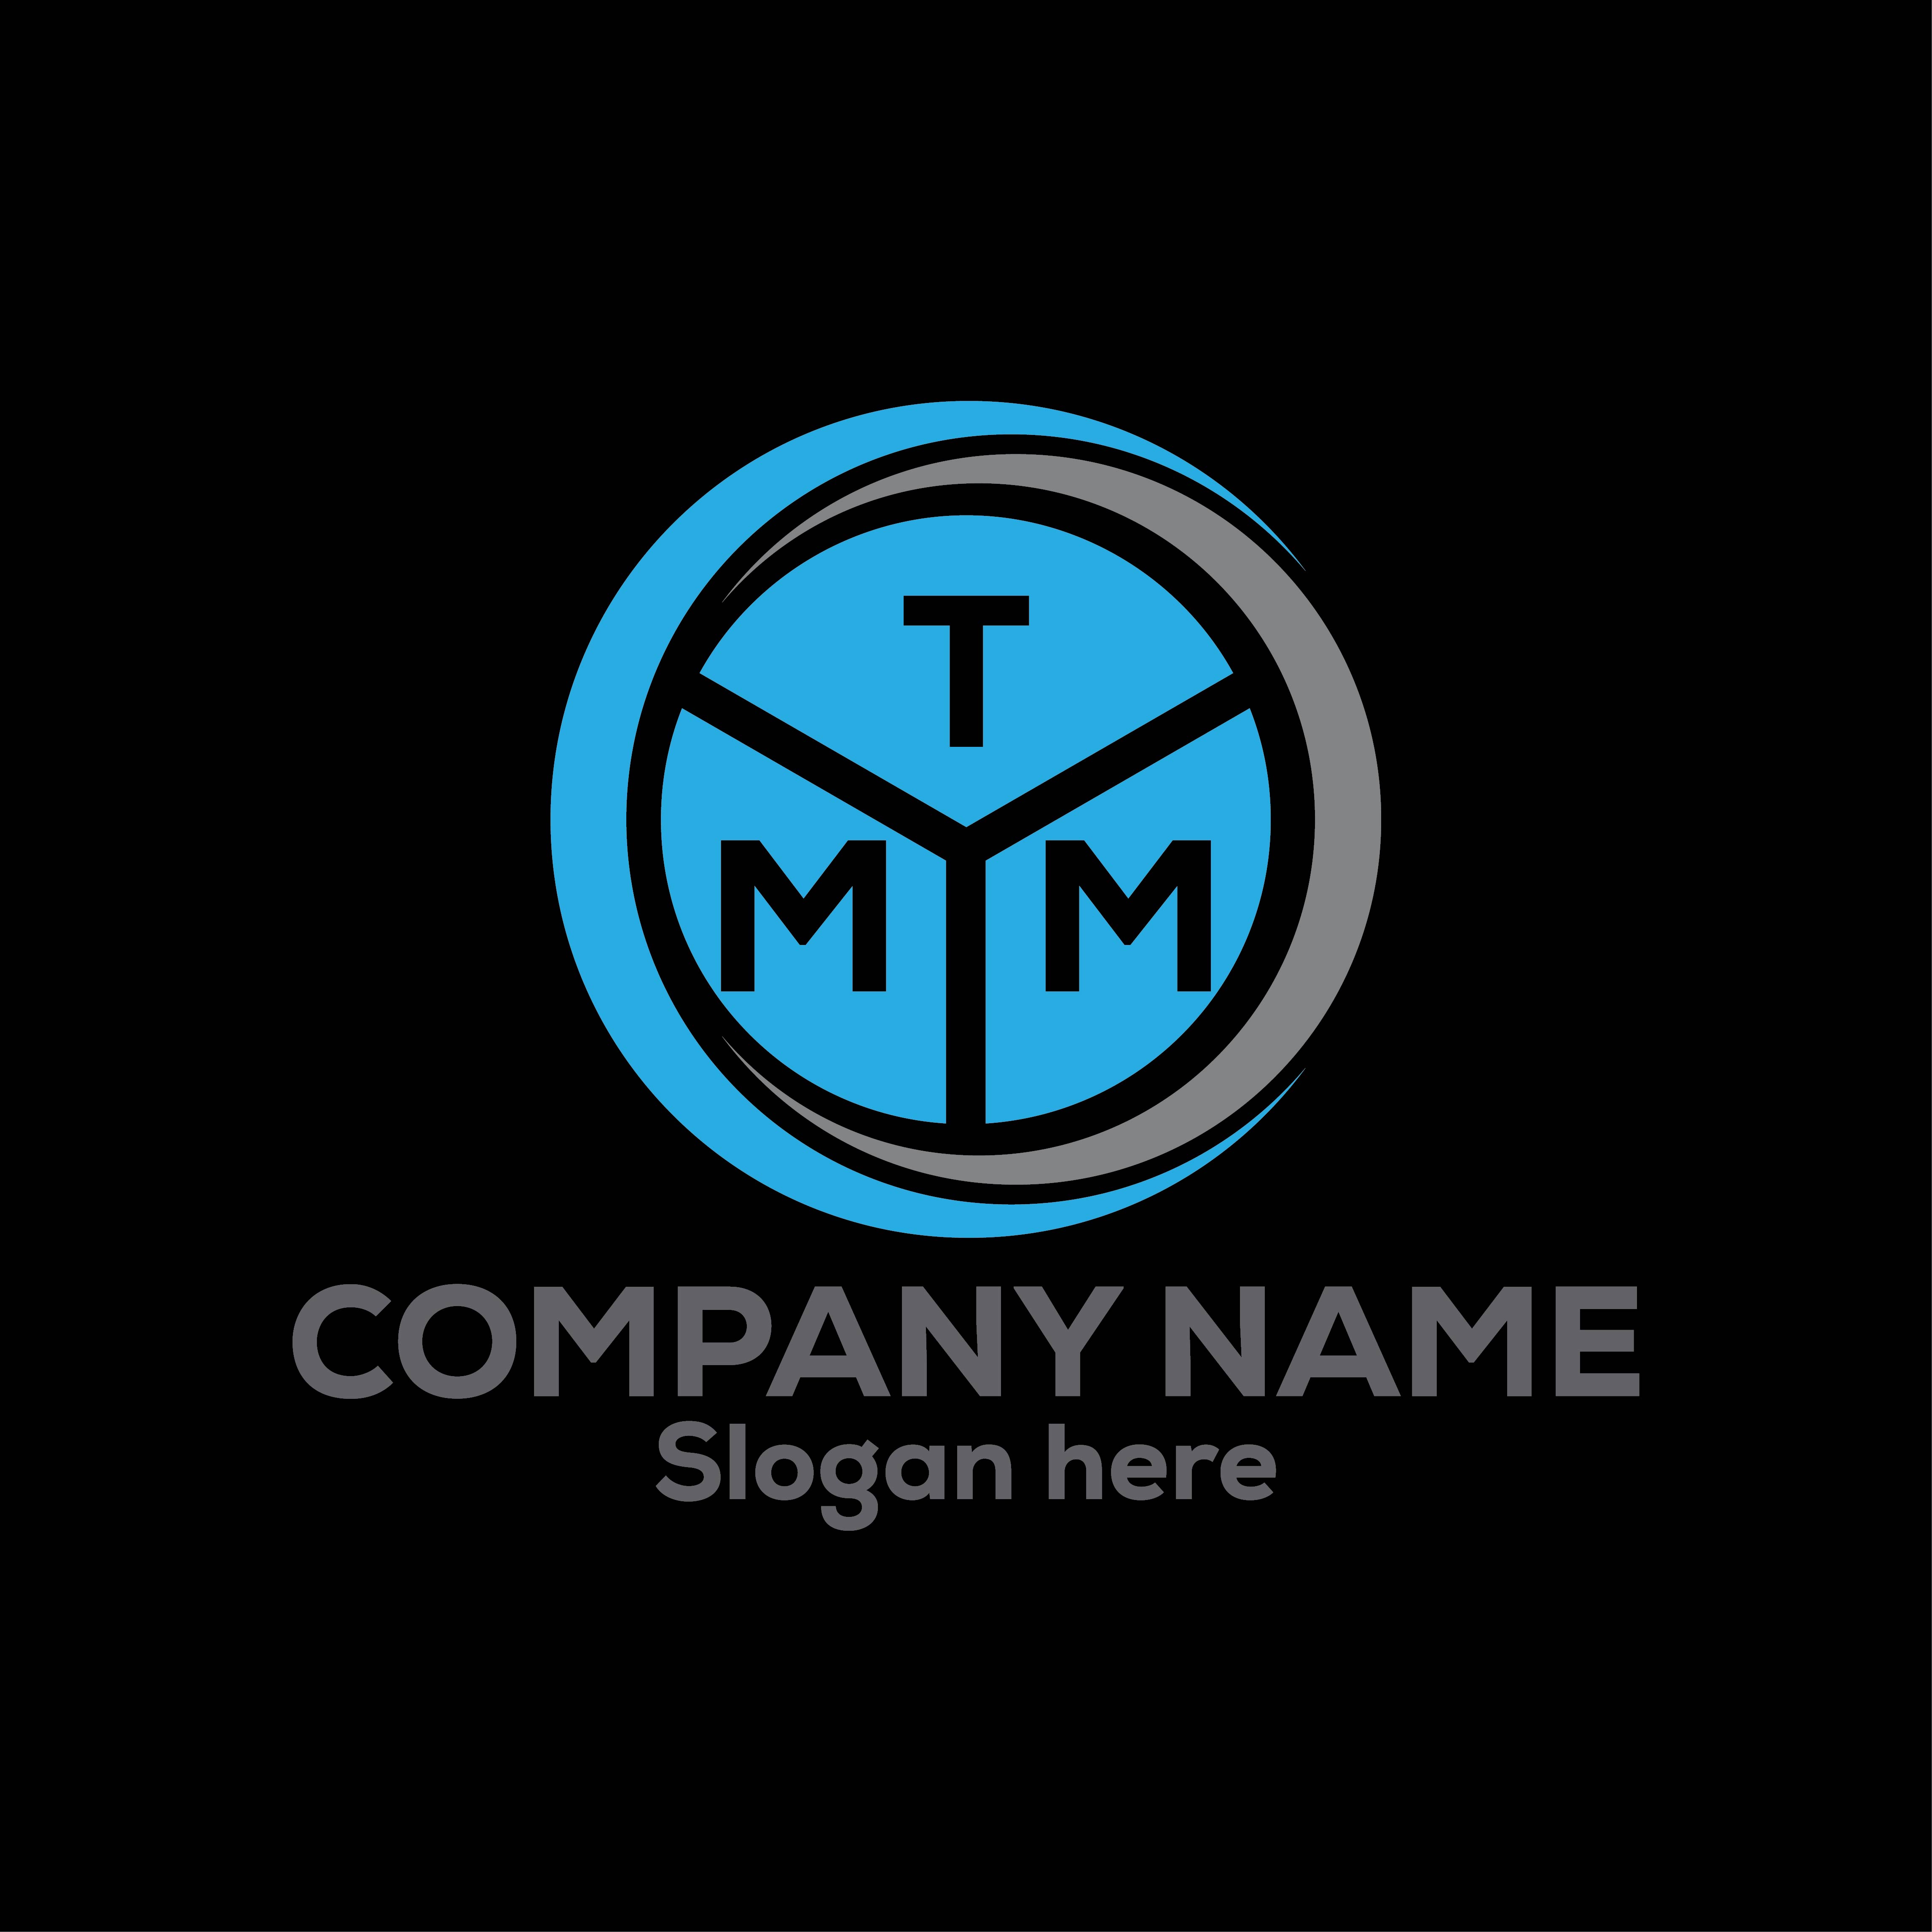 Letter TMM Logo or Icon Design Vector Image Template preview image.